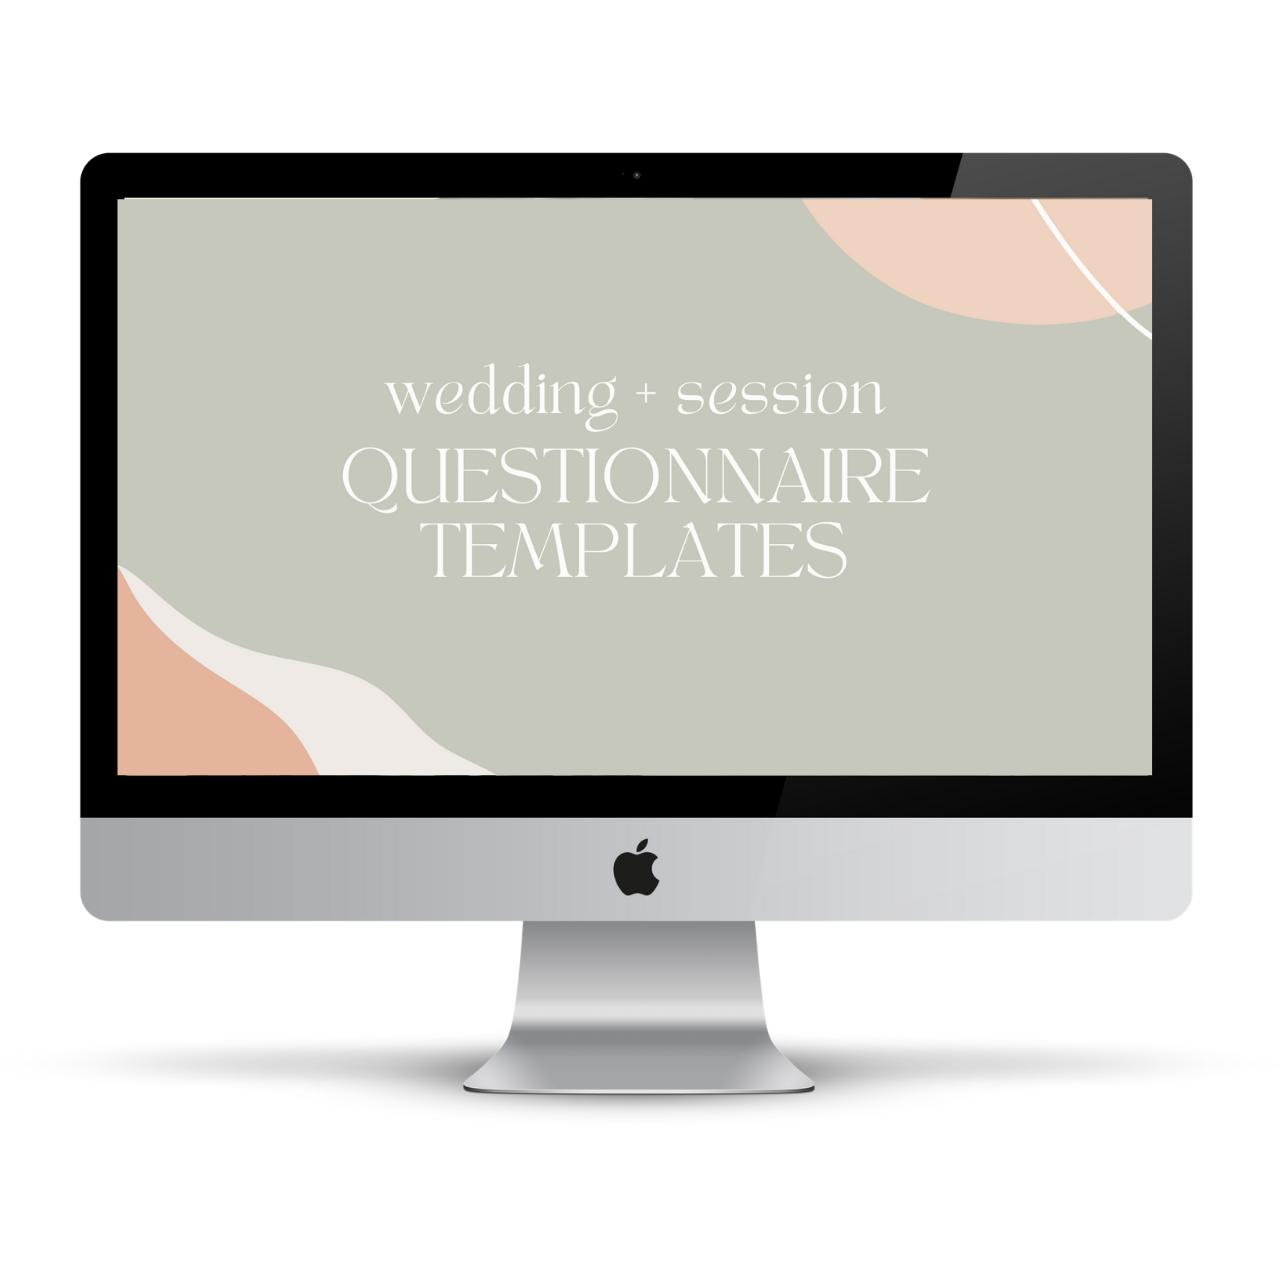 wedding-session-questionnaire-templates-cassidy-lynne-education